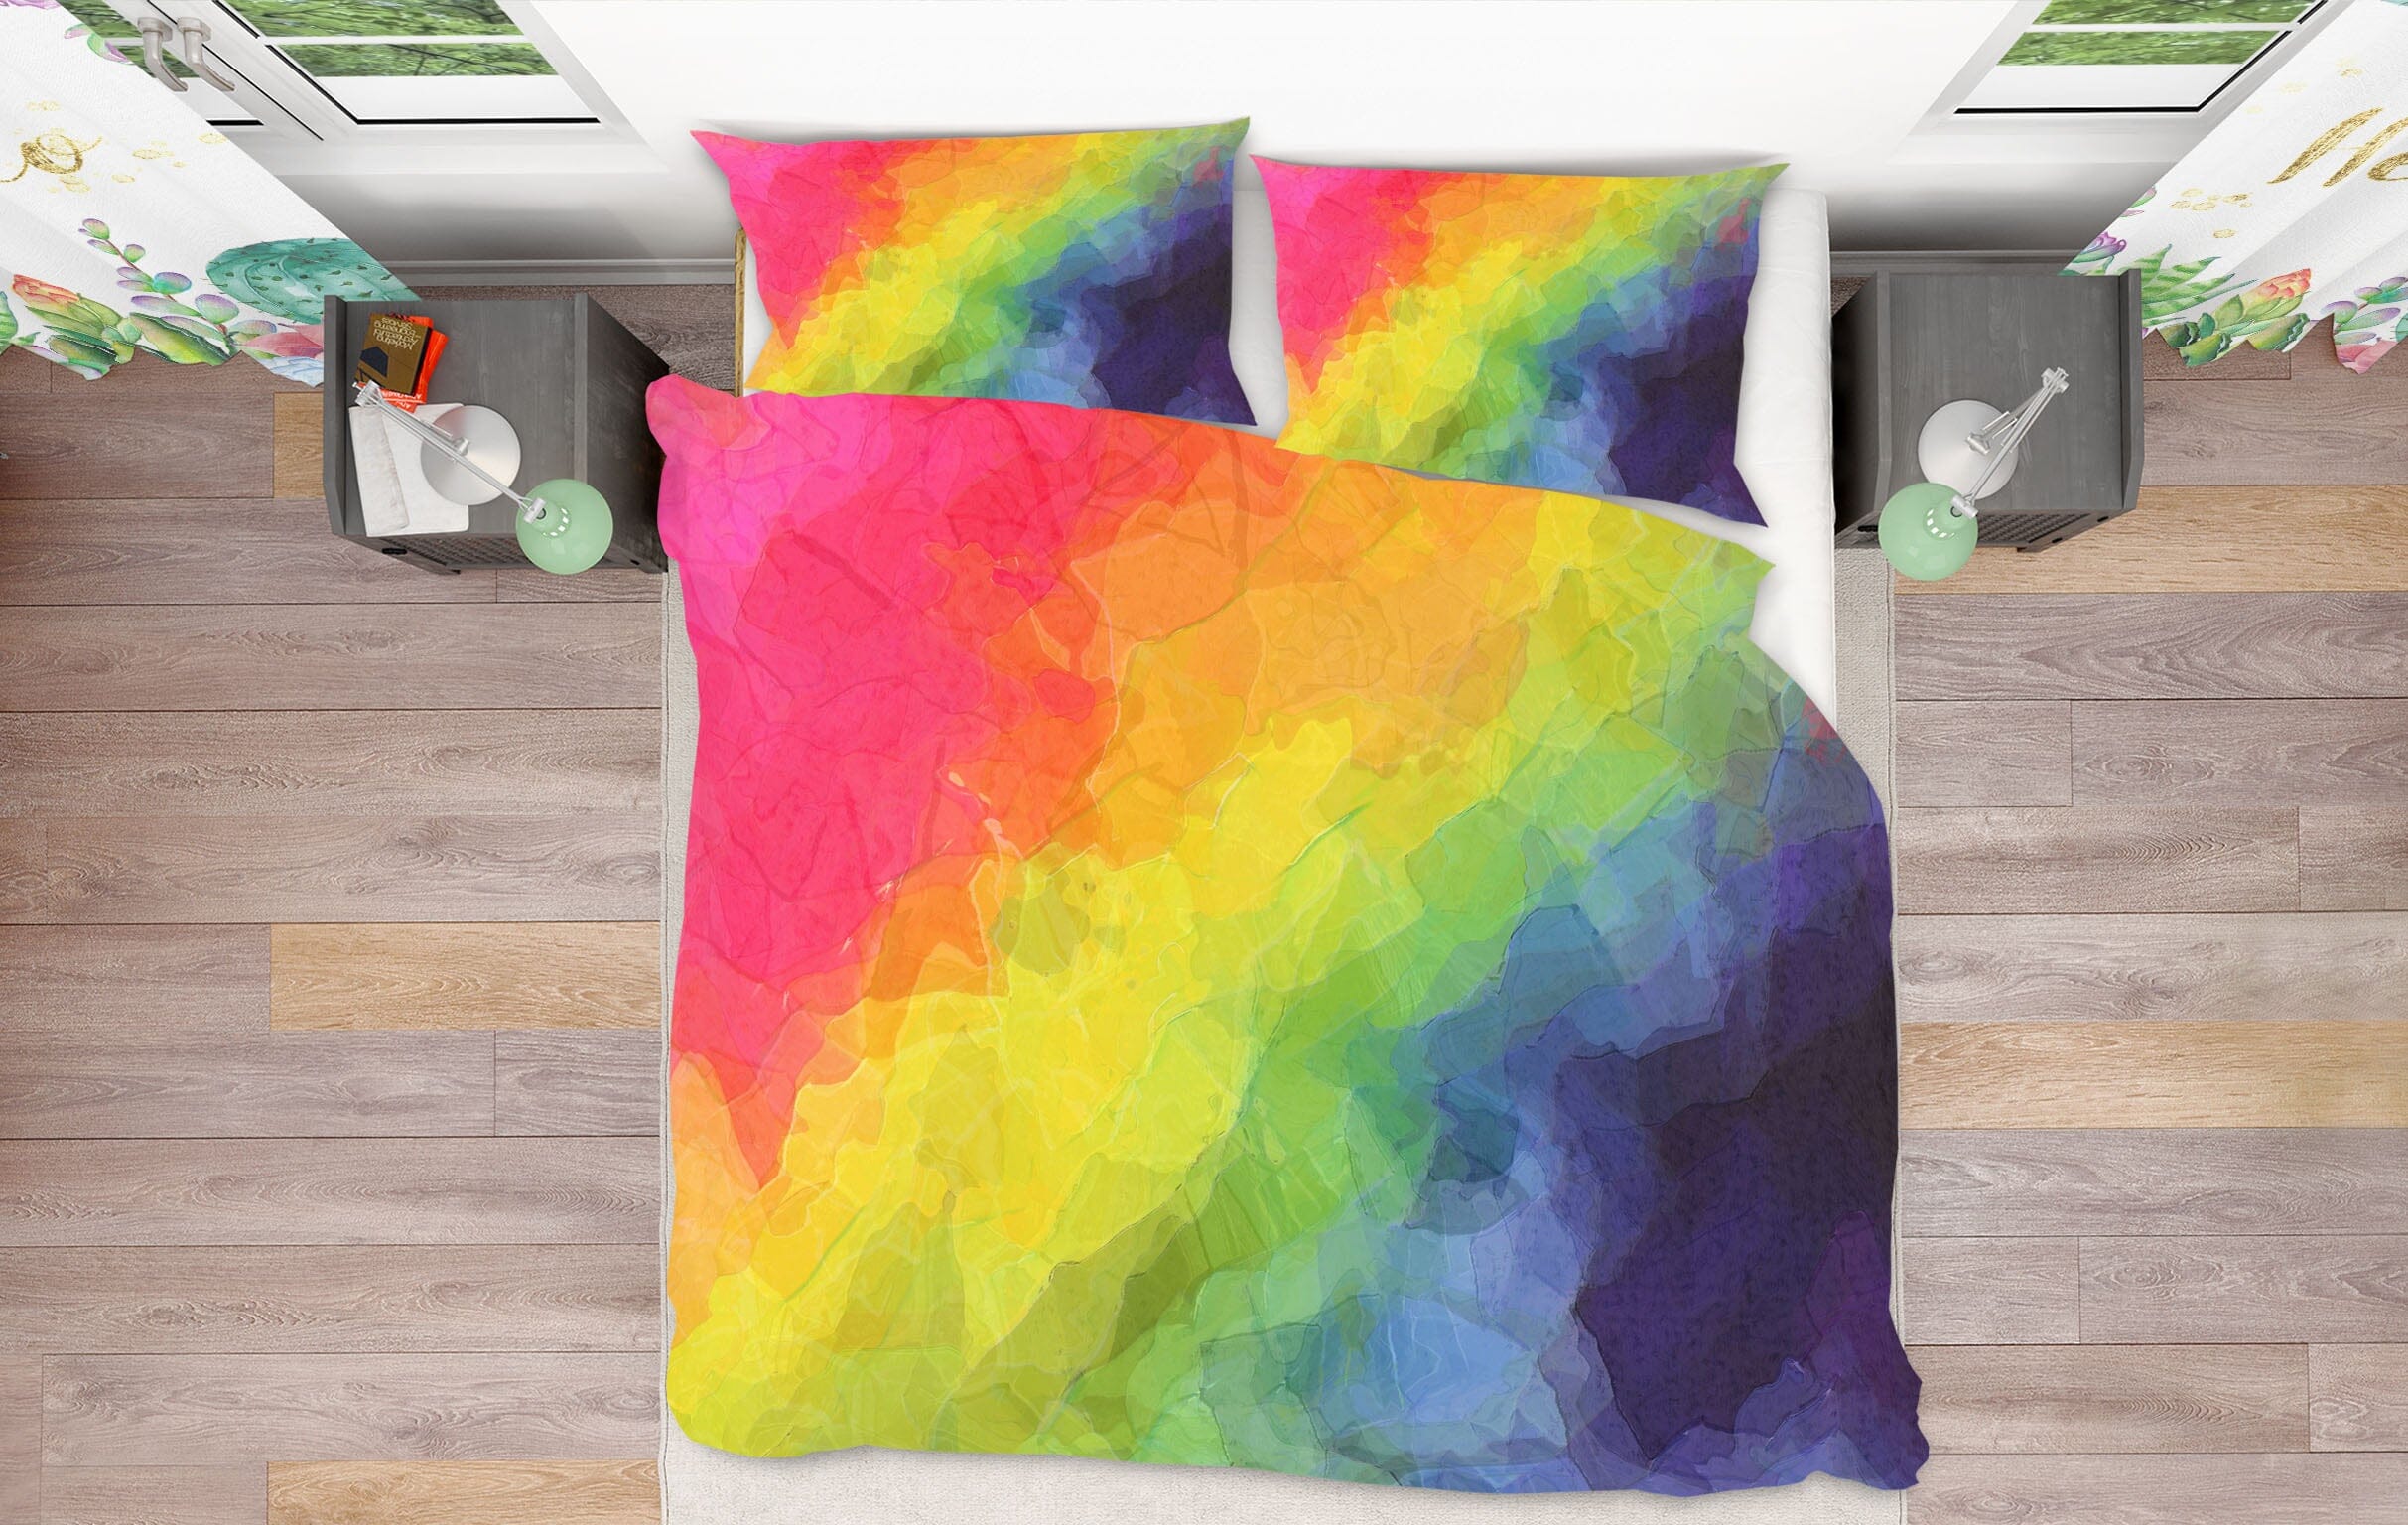 3D Rainbow Color 2003 Shandra Smith Bedding Bed Pillowcases Quilt Quiet Covers AJ Creativity Home 